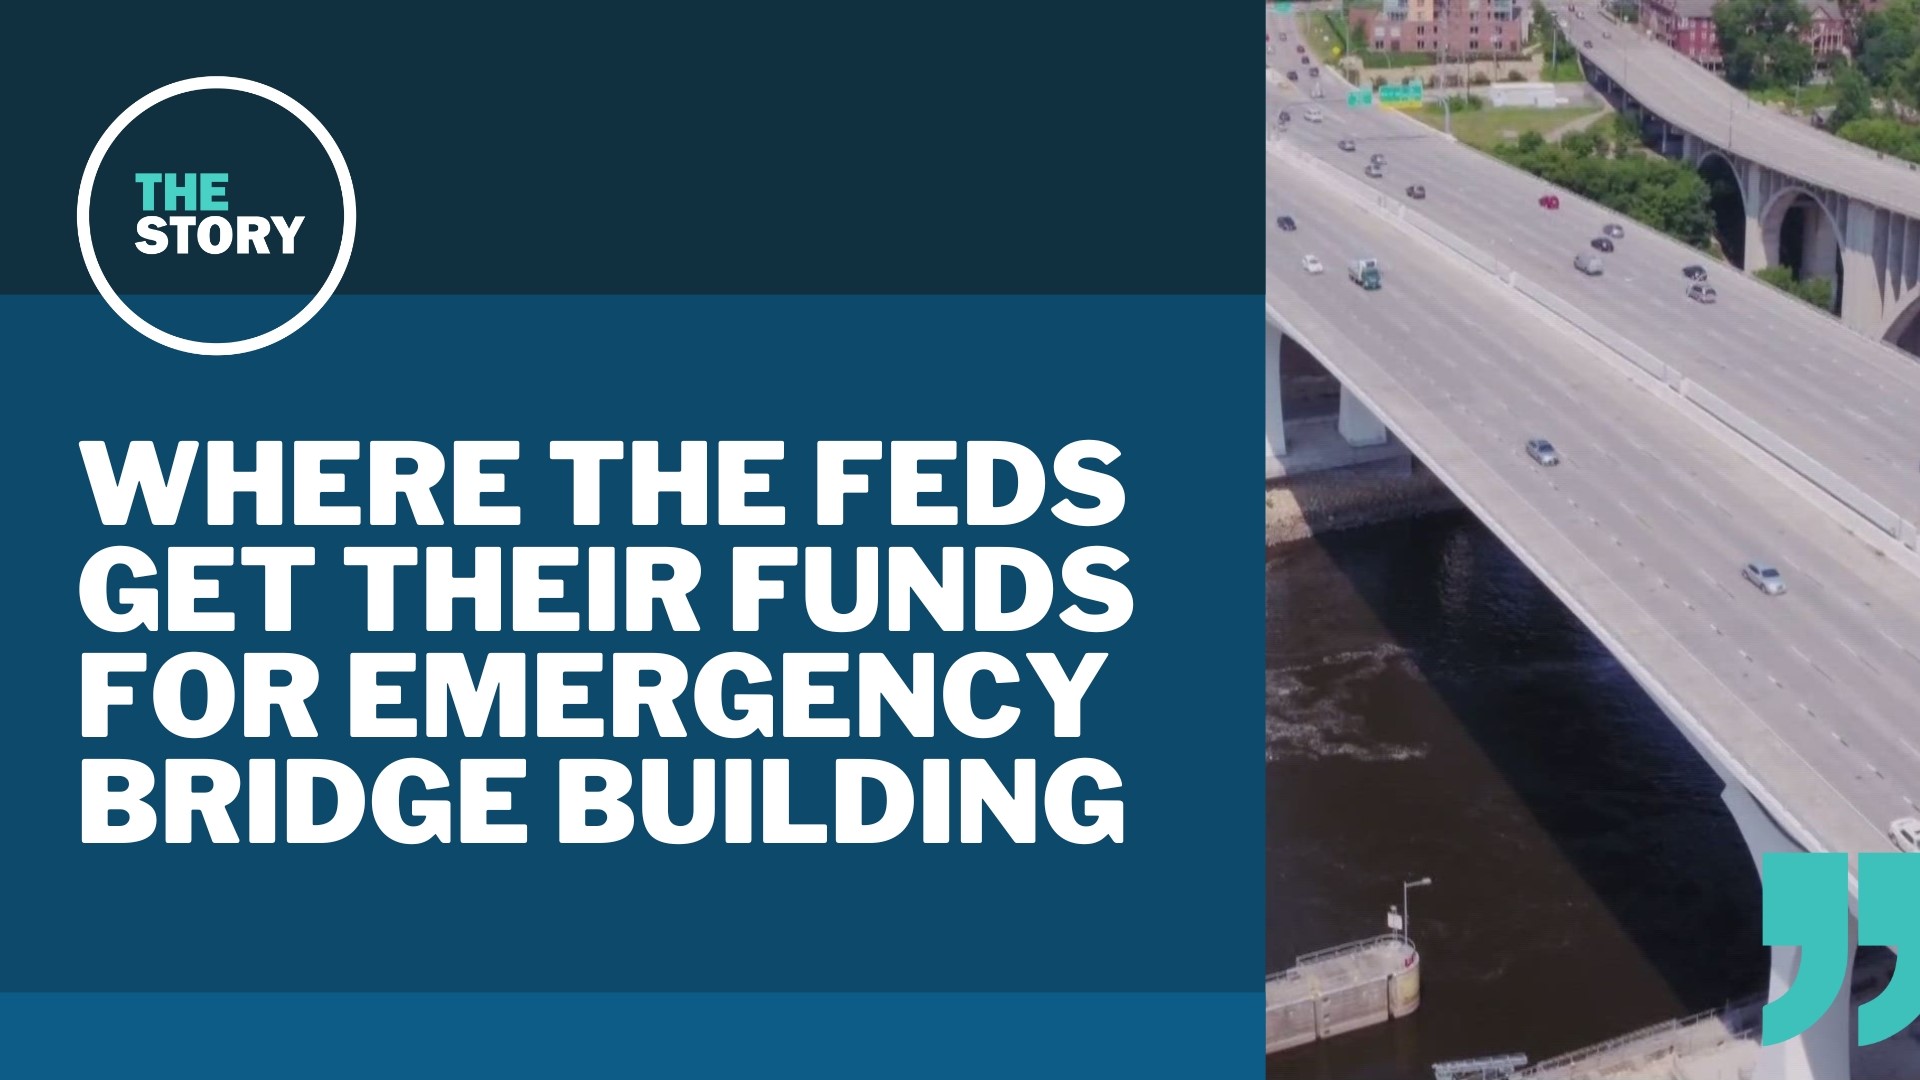 Major disaster rebuild projects are typically covered through emergency or new congressional funding, without affecting funding for existing projects.